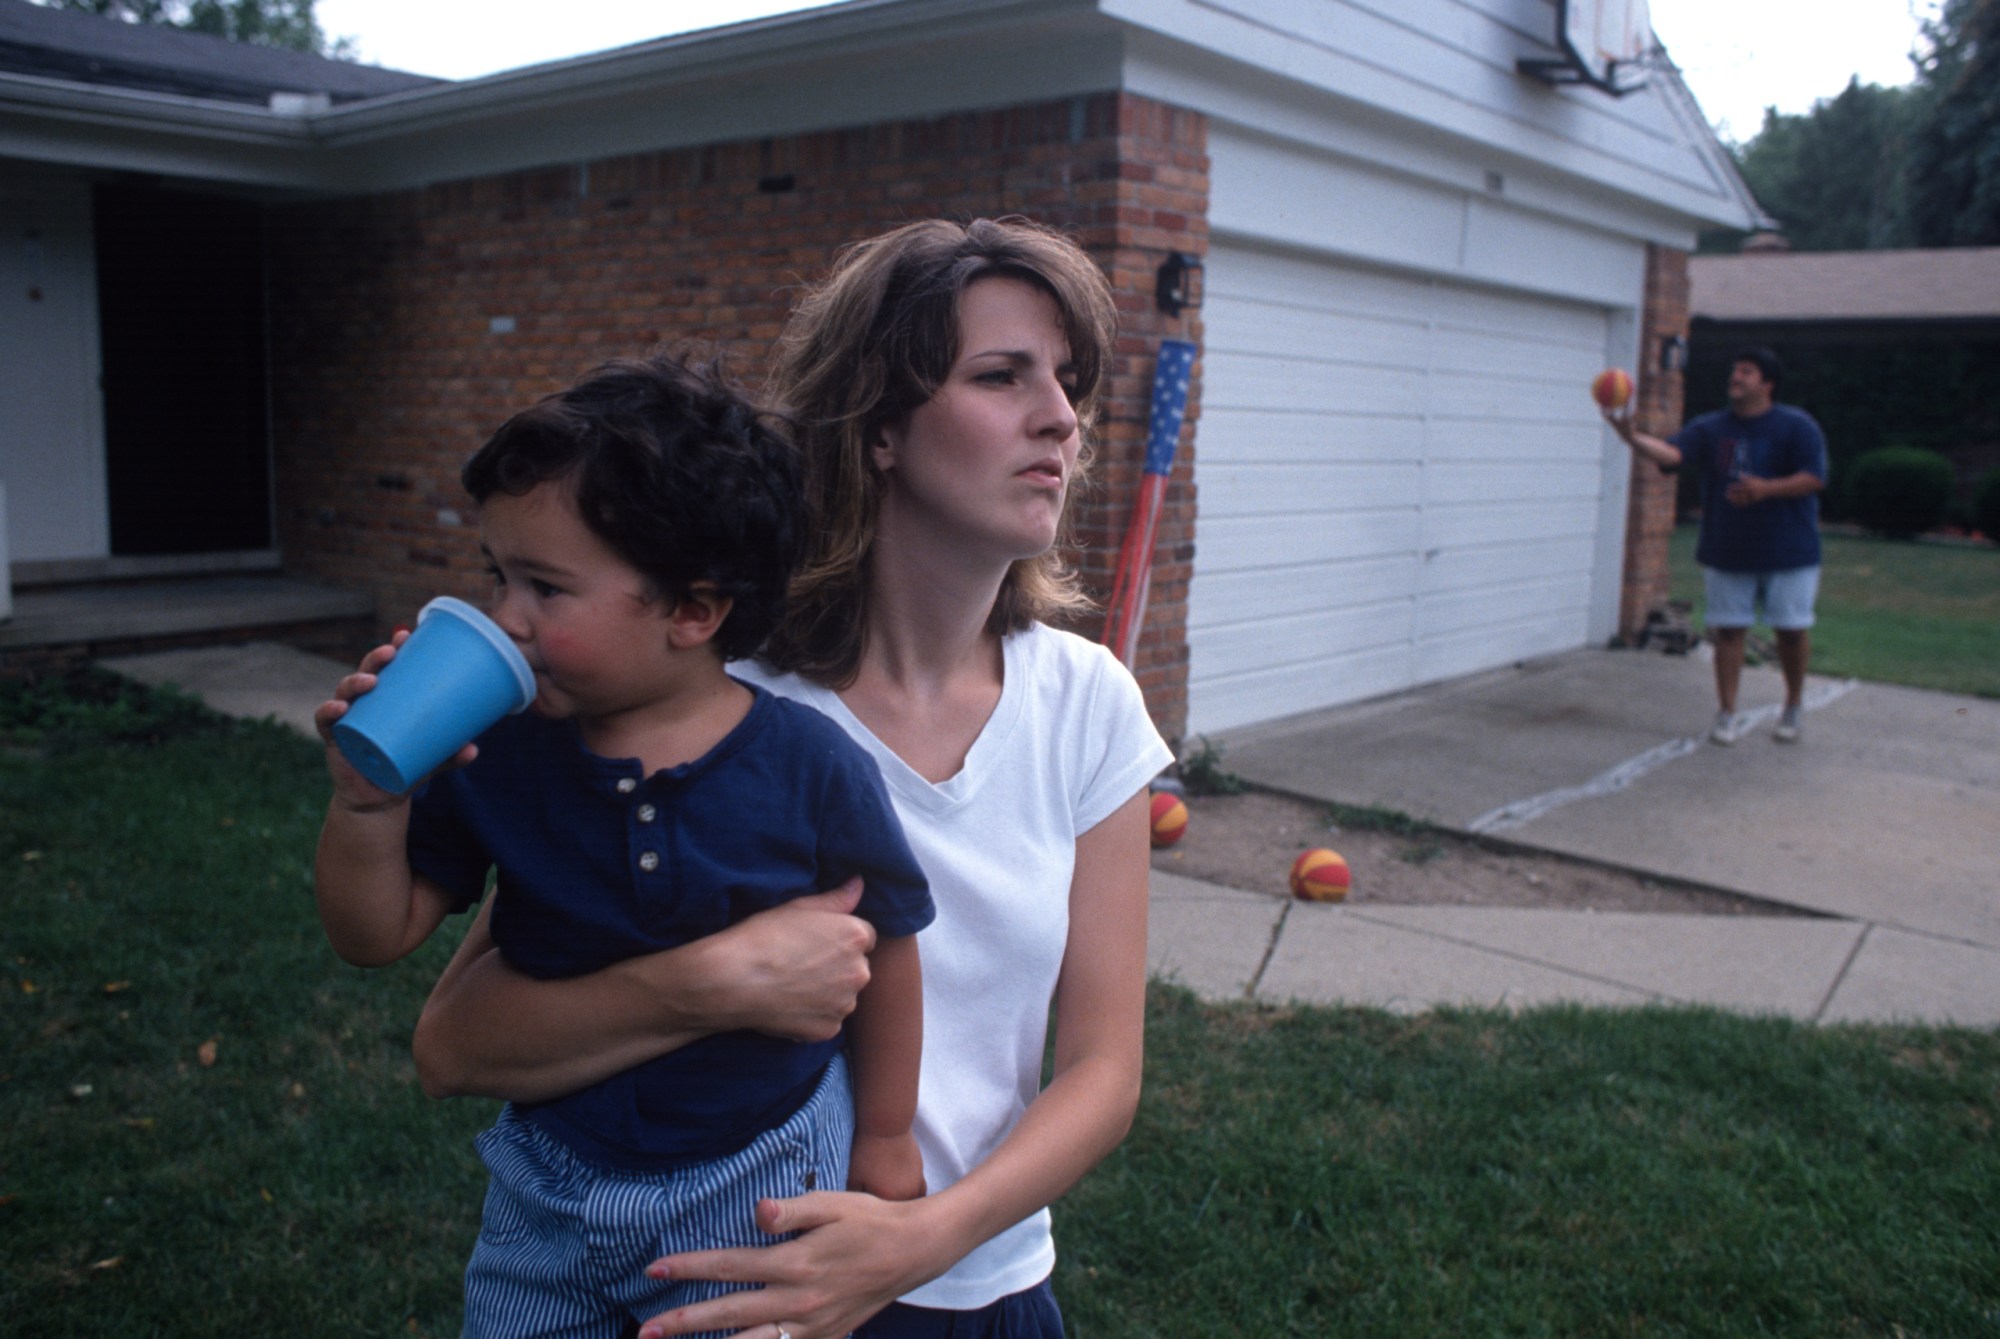 The wife of a striking General Motors assembly line worker worries about the family's economic future on July 8, 1998 in Flint, Michigan. (Getty/ Andrew Lichtenstein)